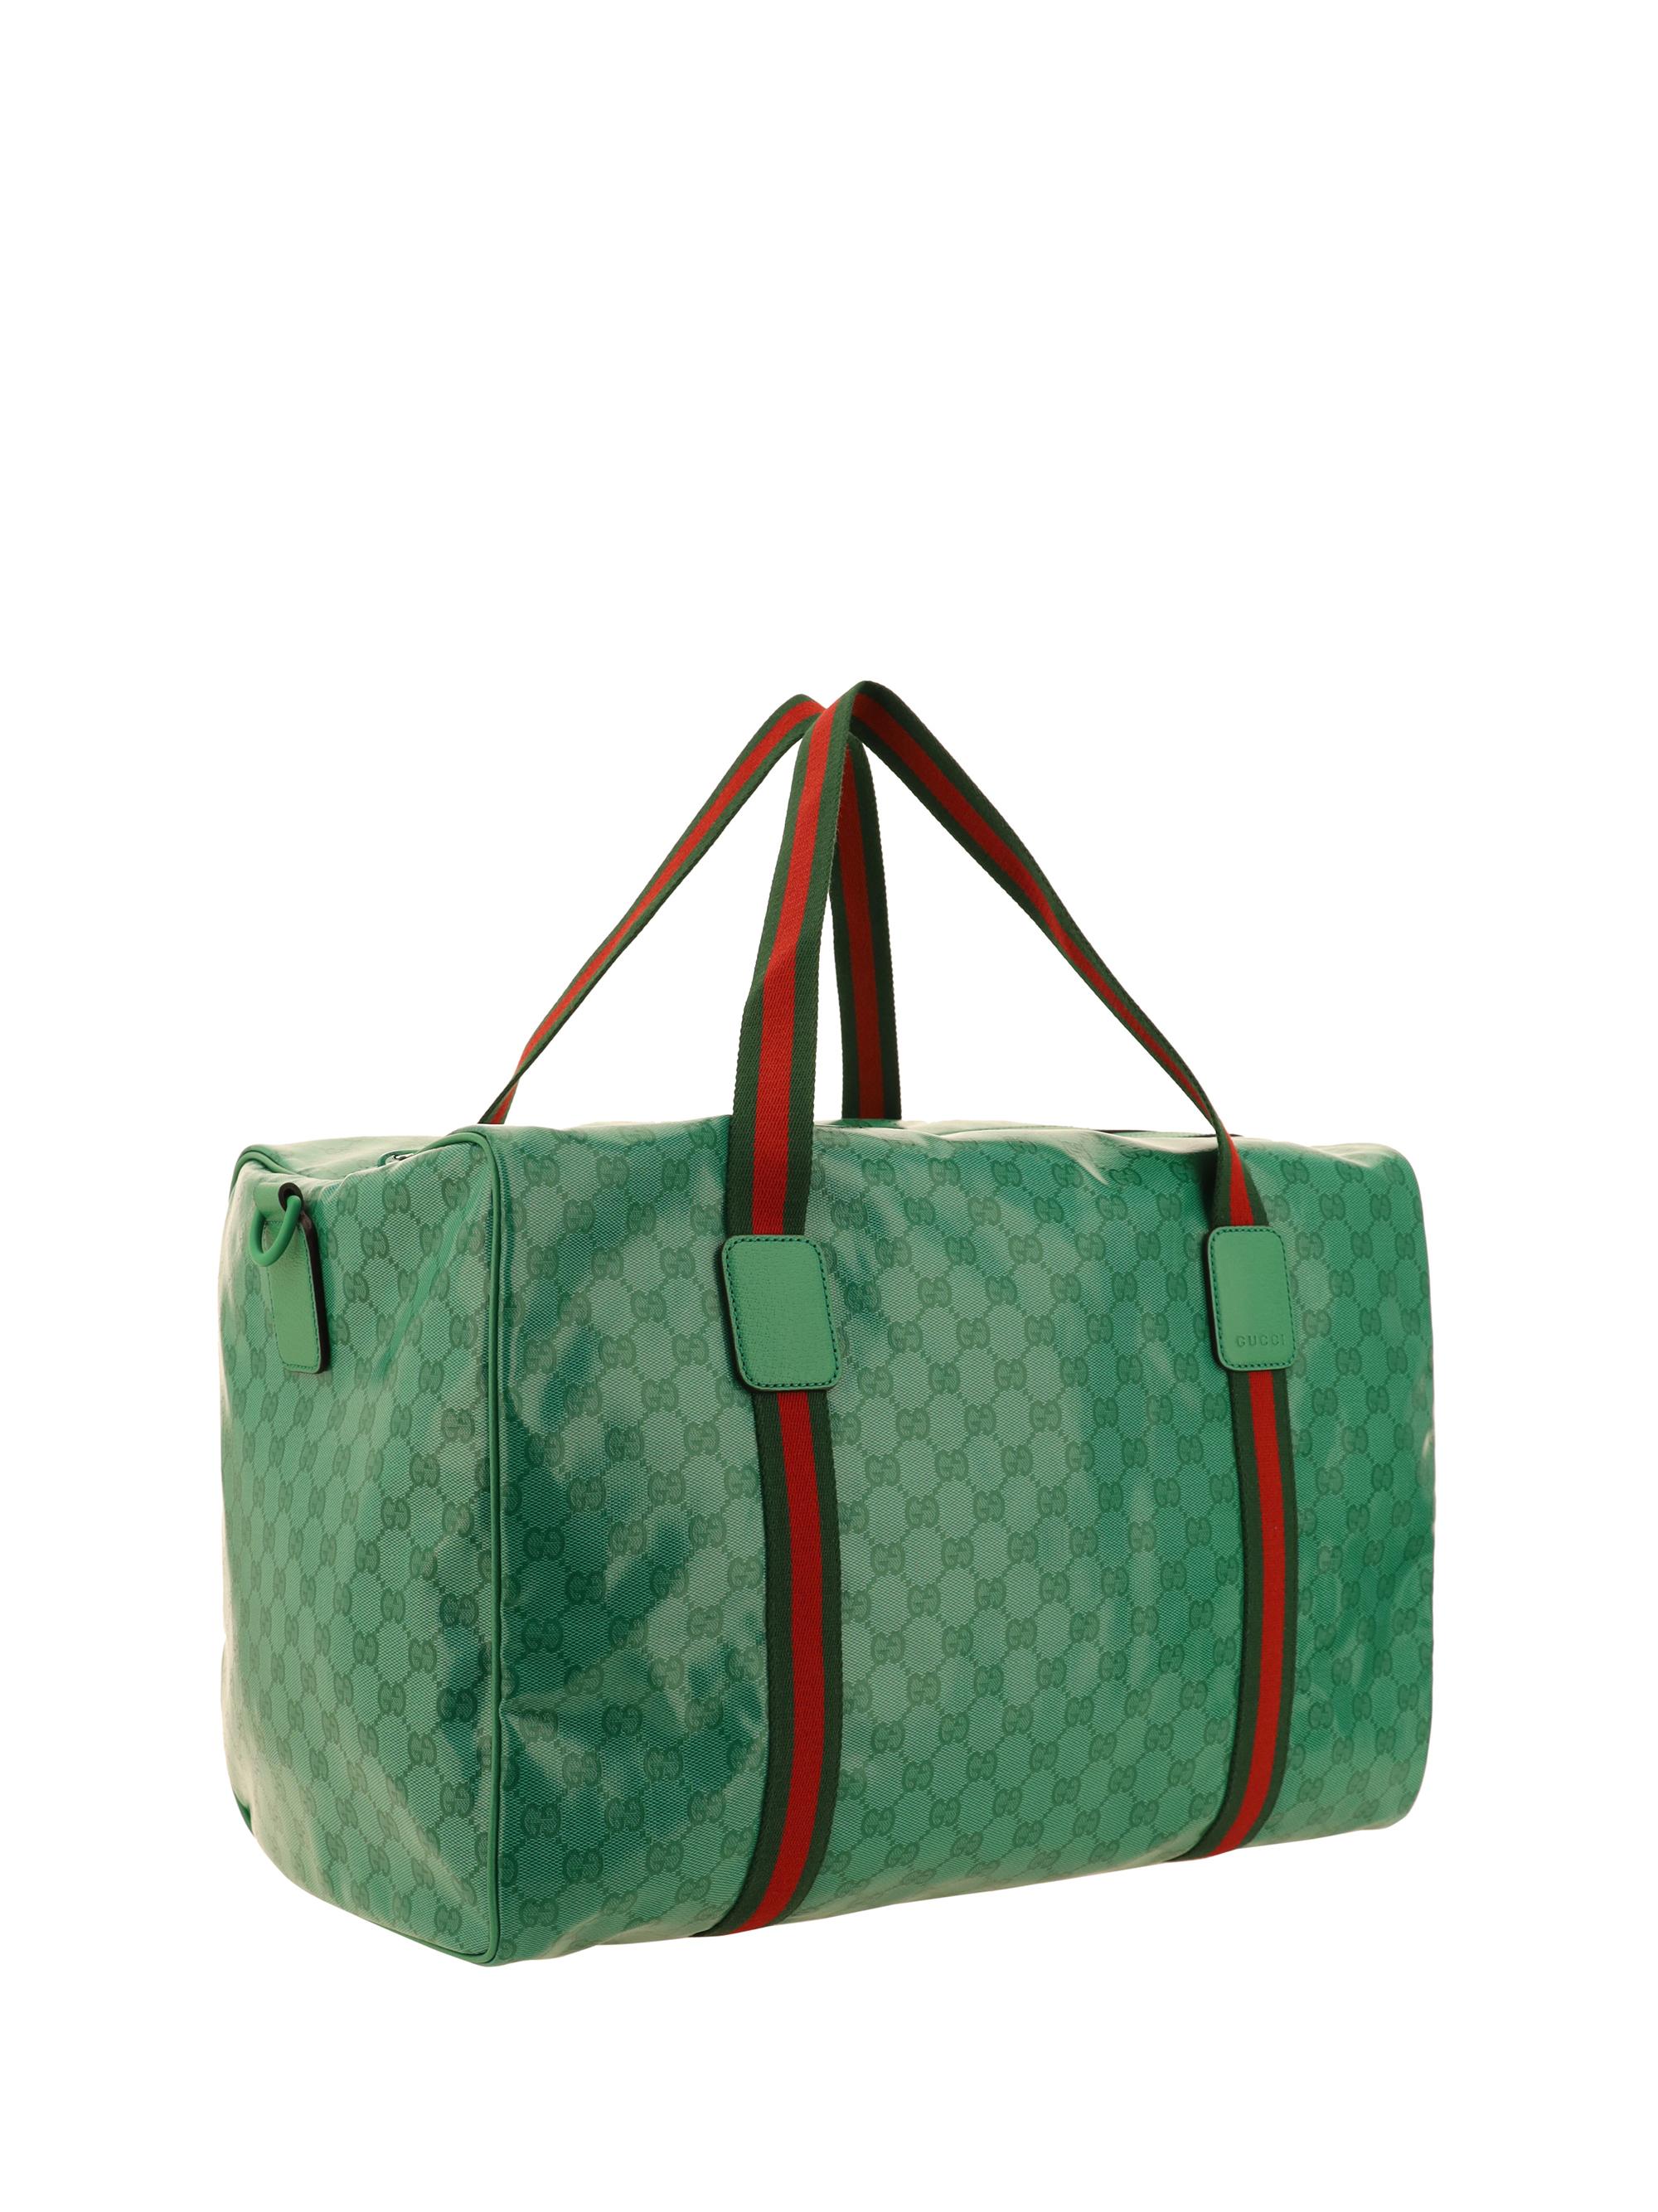 Gucci Savoy small duffle bag in green leather | GUCCI® US